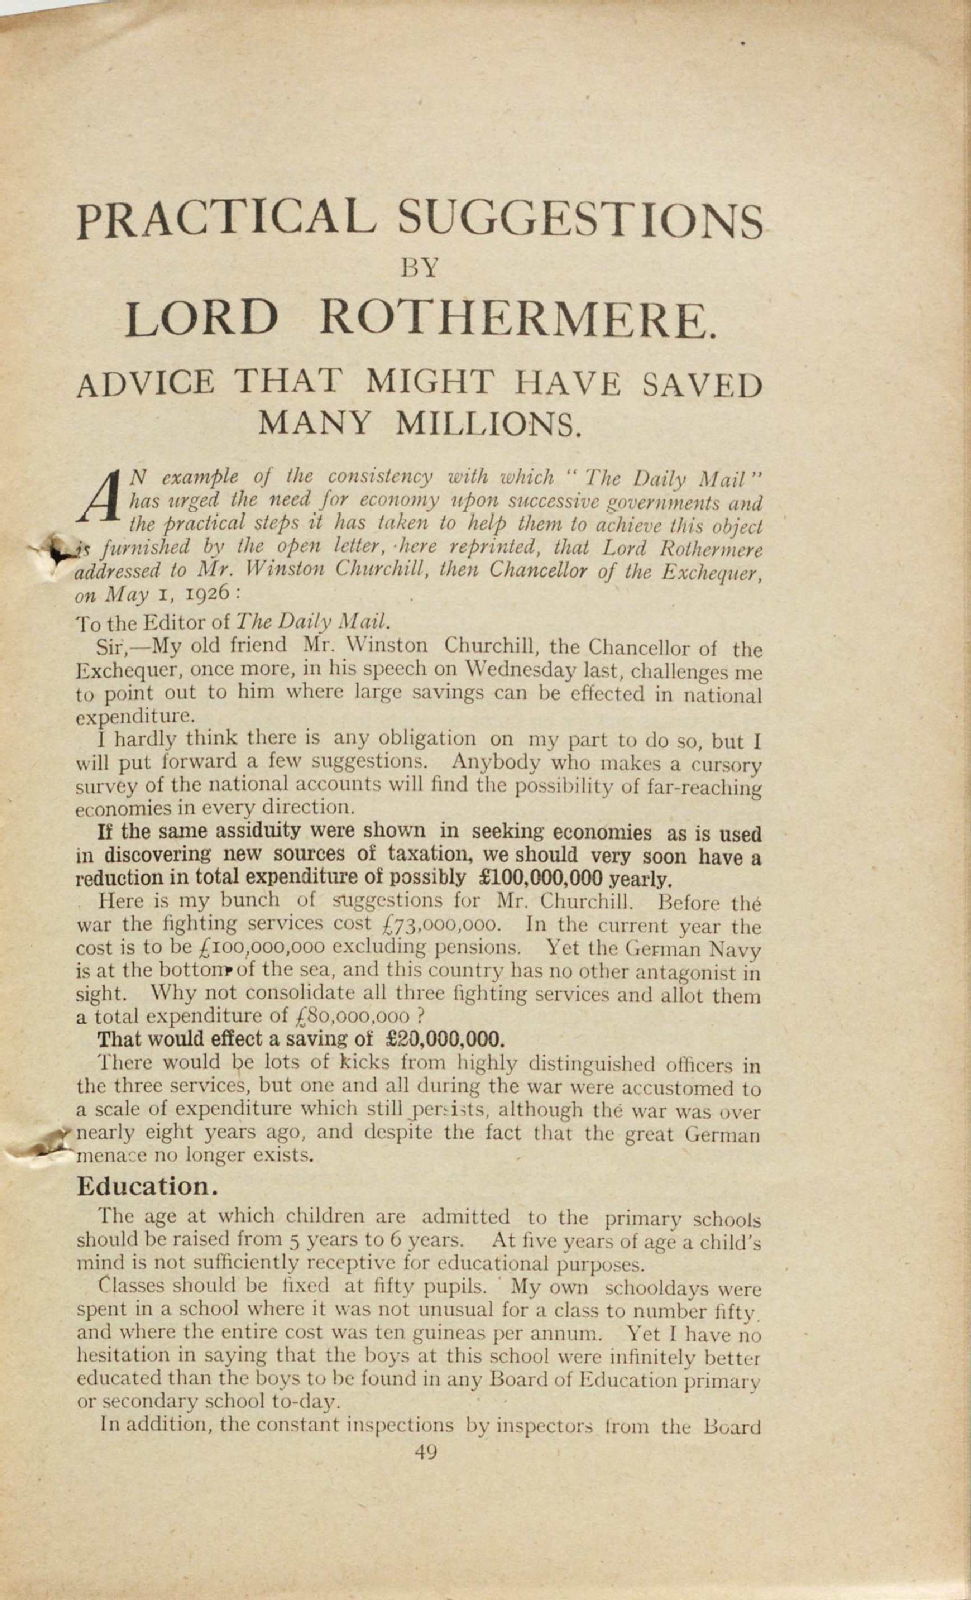 Practical suggestions by Lord Rothermere